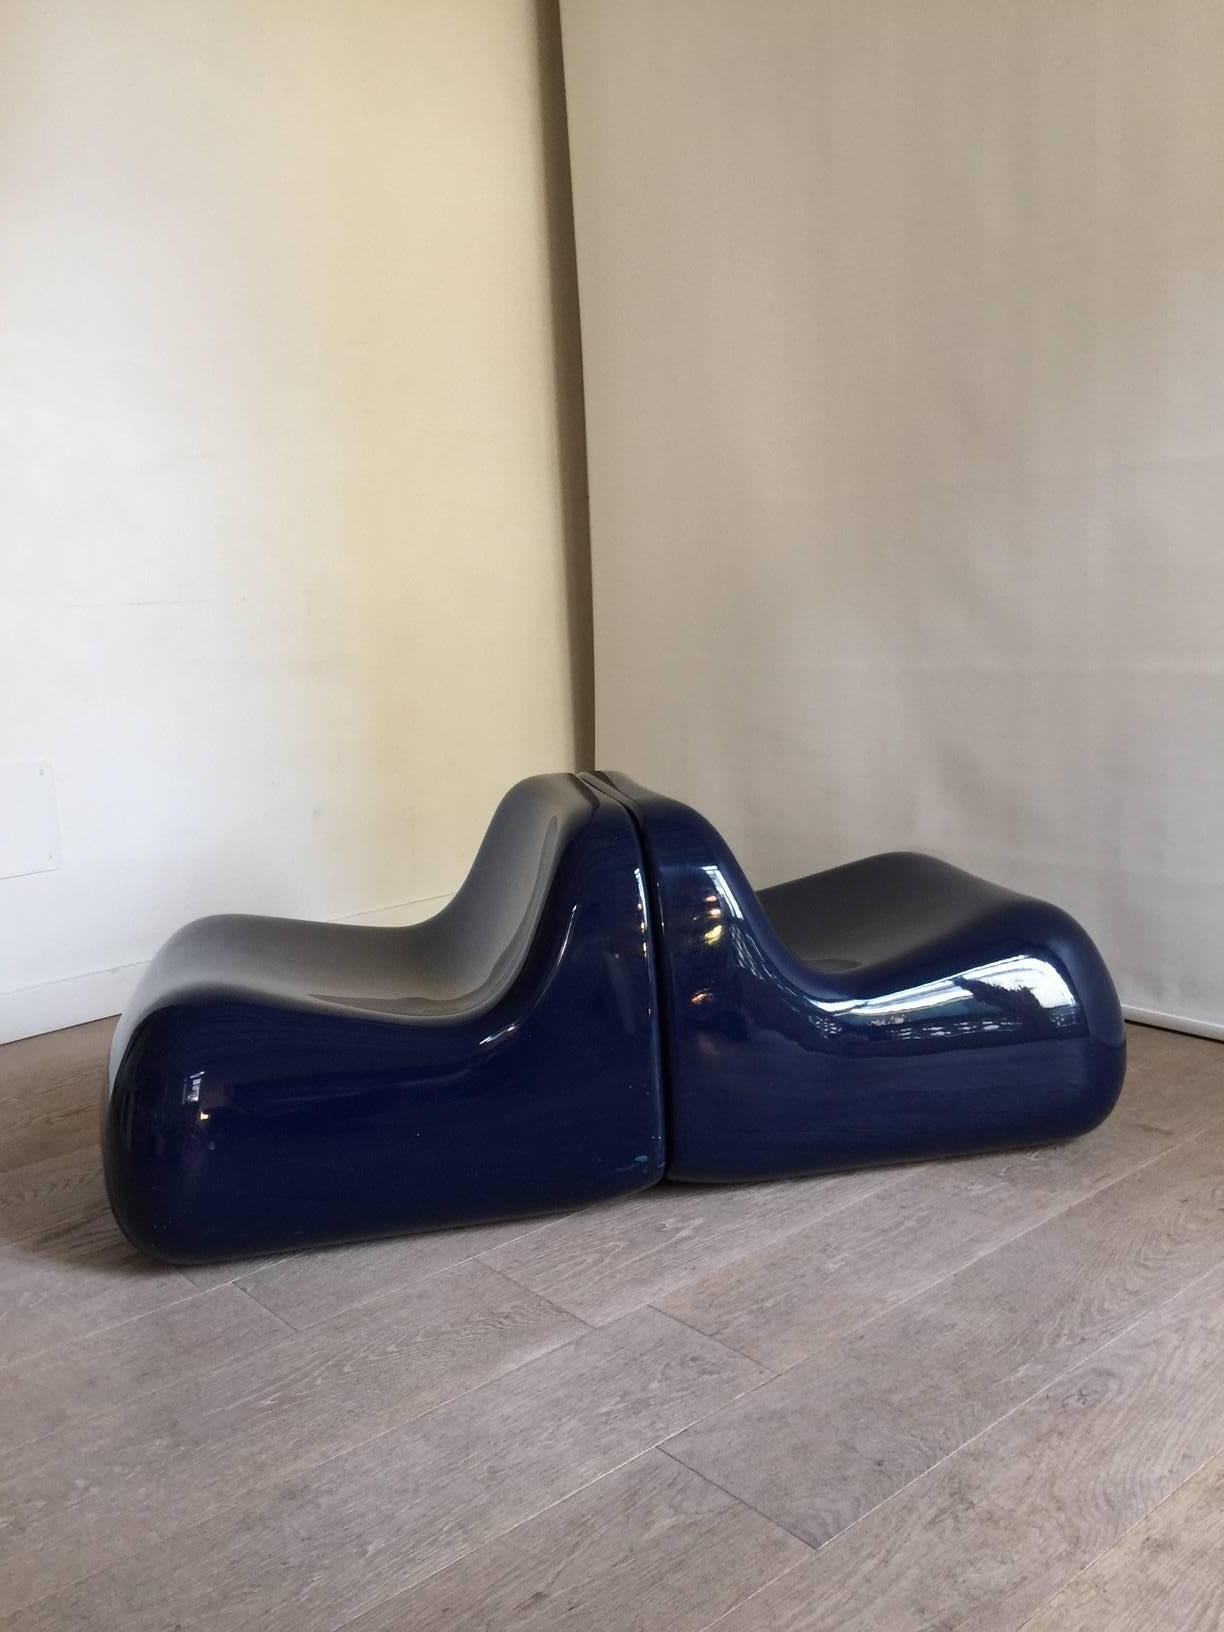 Outstanding example of Space Age Minimalist fiberglass chairs designed by Alberto Rosselli for Saporiti in 1968. The chairs are made from blue lacquered fiberglass. This set remains in very good condition.